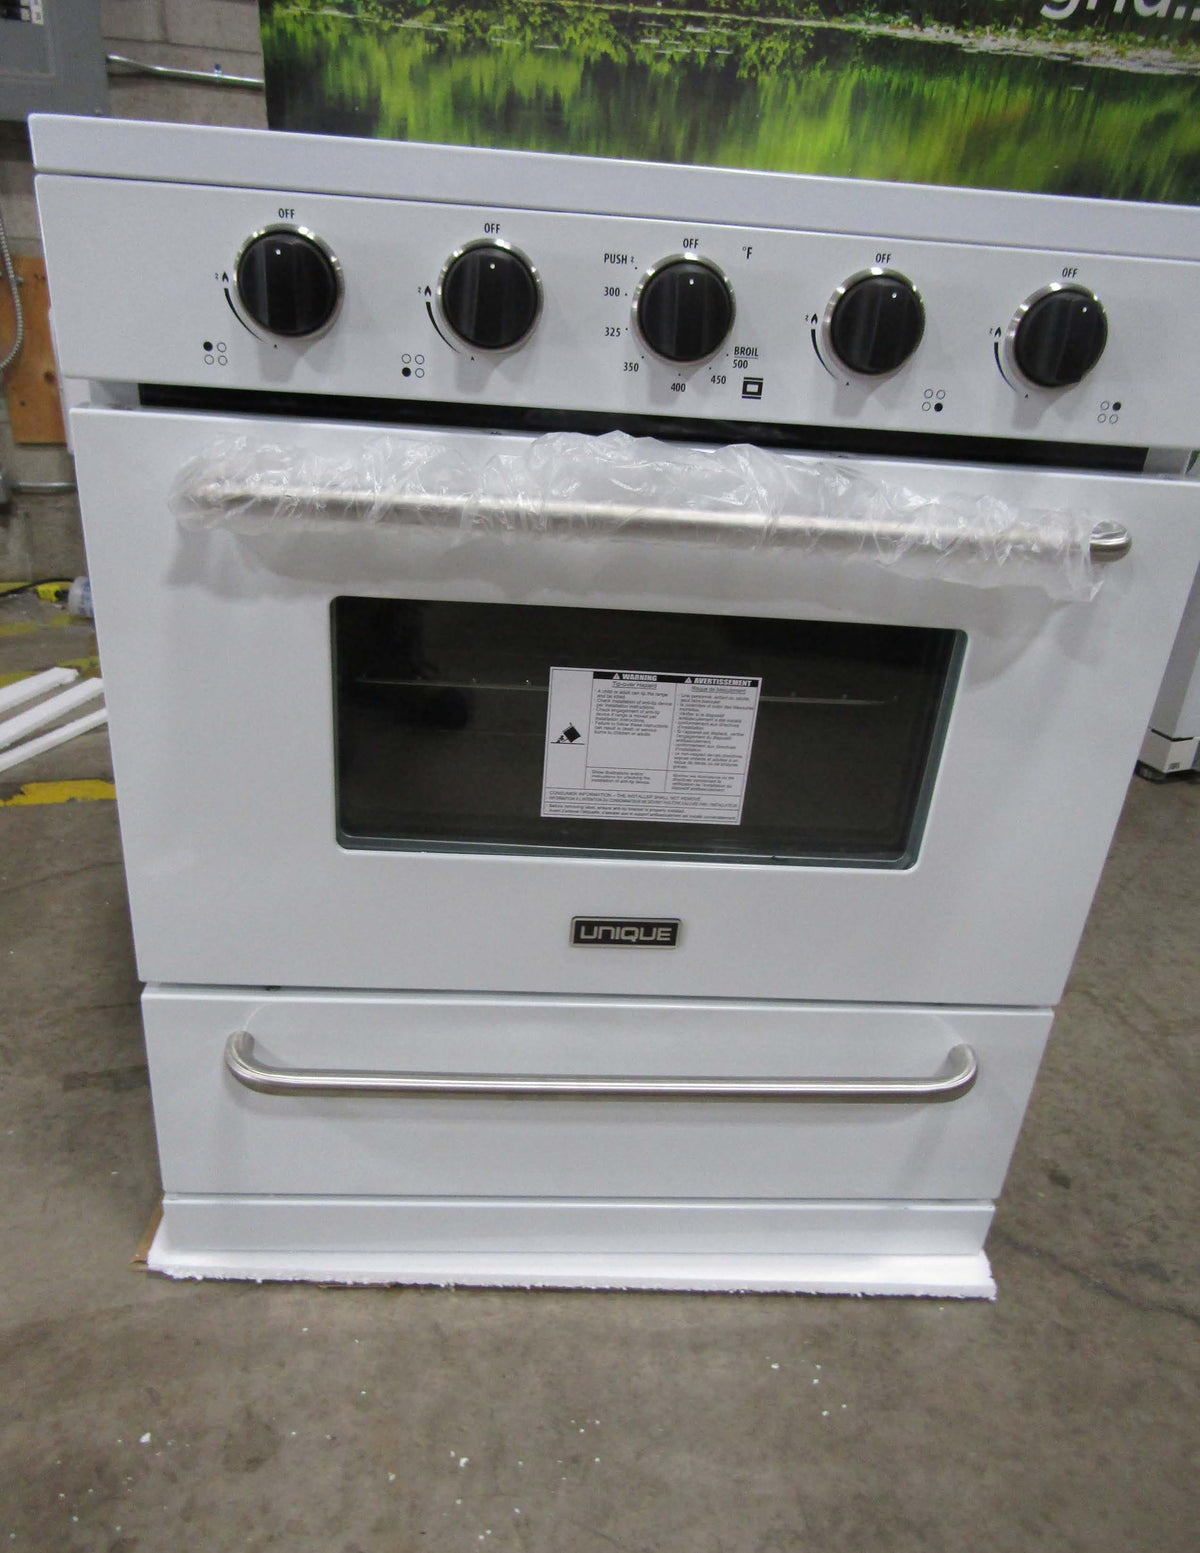 Unique Scratch and Dent or Pre-Owned Off-Grid Appliances New Scratch &amp; Dent Unique Classic 30&quot; Propane Range Battery Ignition Variable BTU Sealed Burners Cast Iron Grates With Window UGP-30G OF1 W (White) Serial #1017592 30% Off!